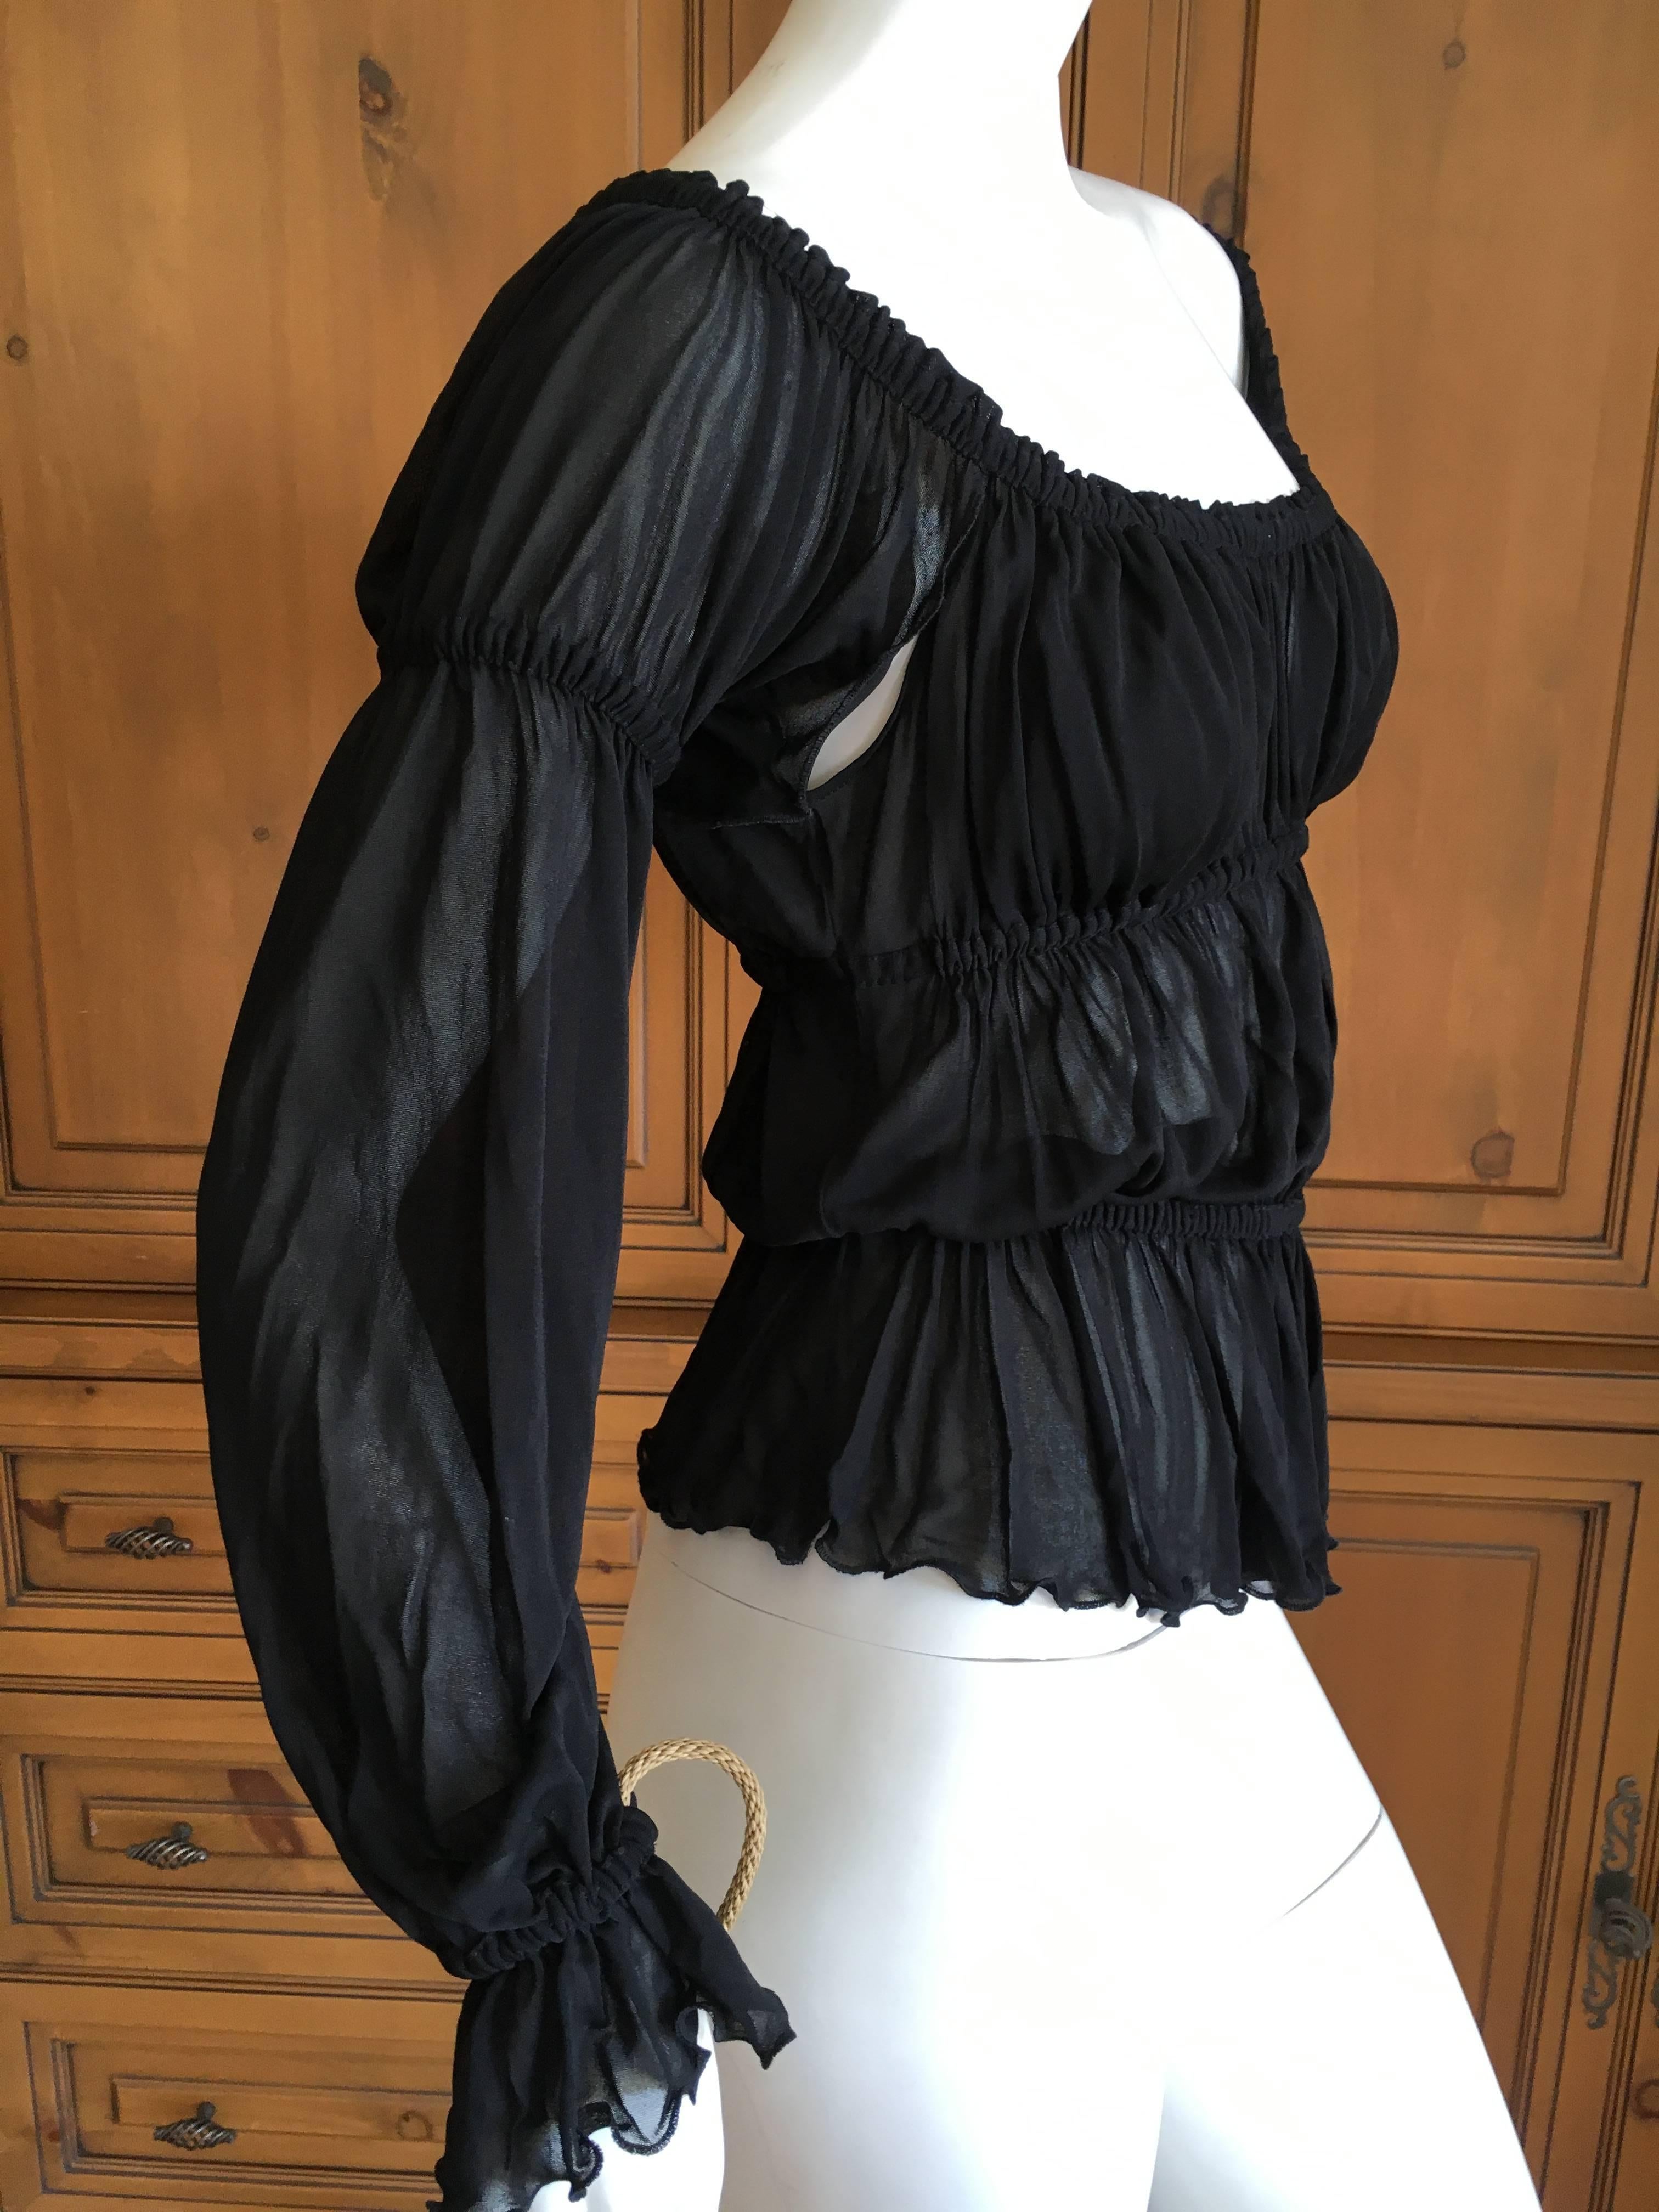 Yves Saint Laurent by Tom Ford Romantic Black Top For Sale 1